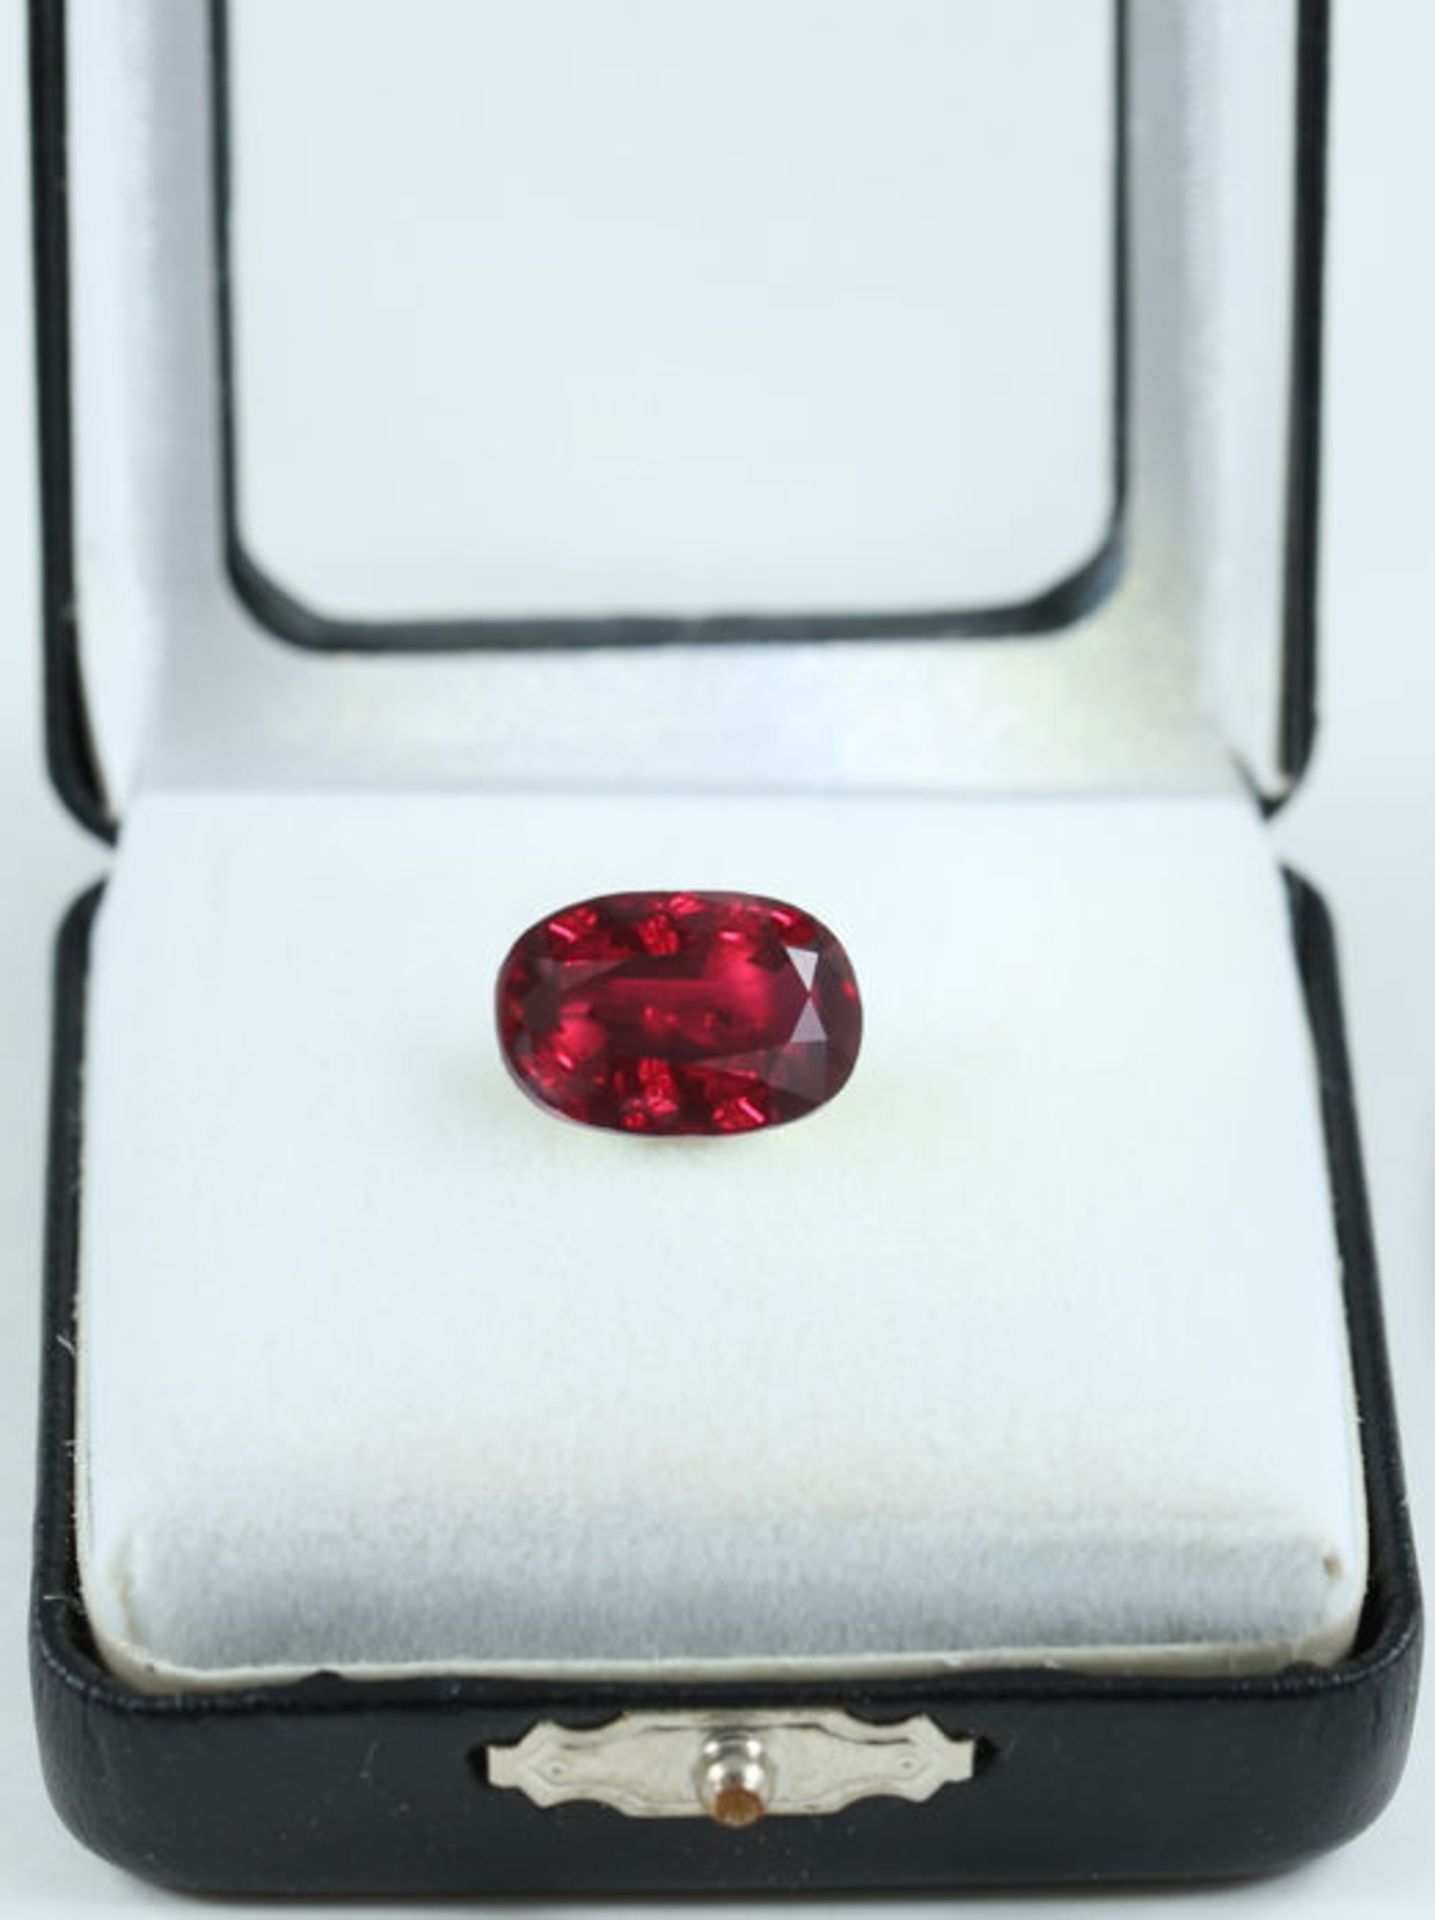 GRS Certified 5.02 ct. “Pigeon Blood” Ruby - Image 10 of 10